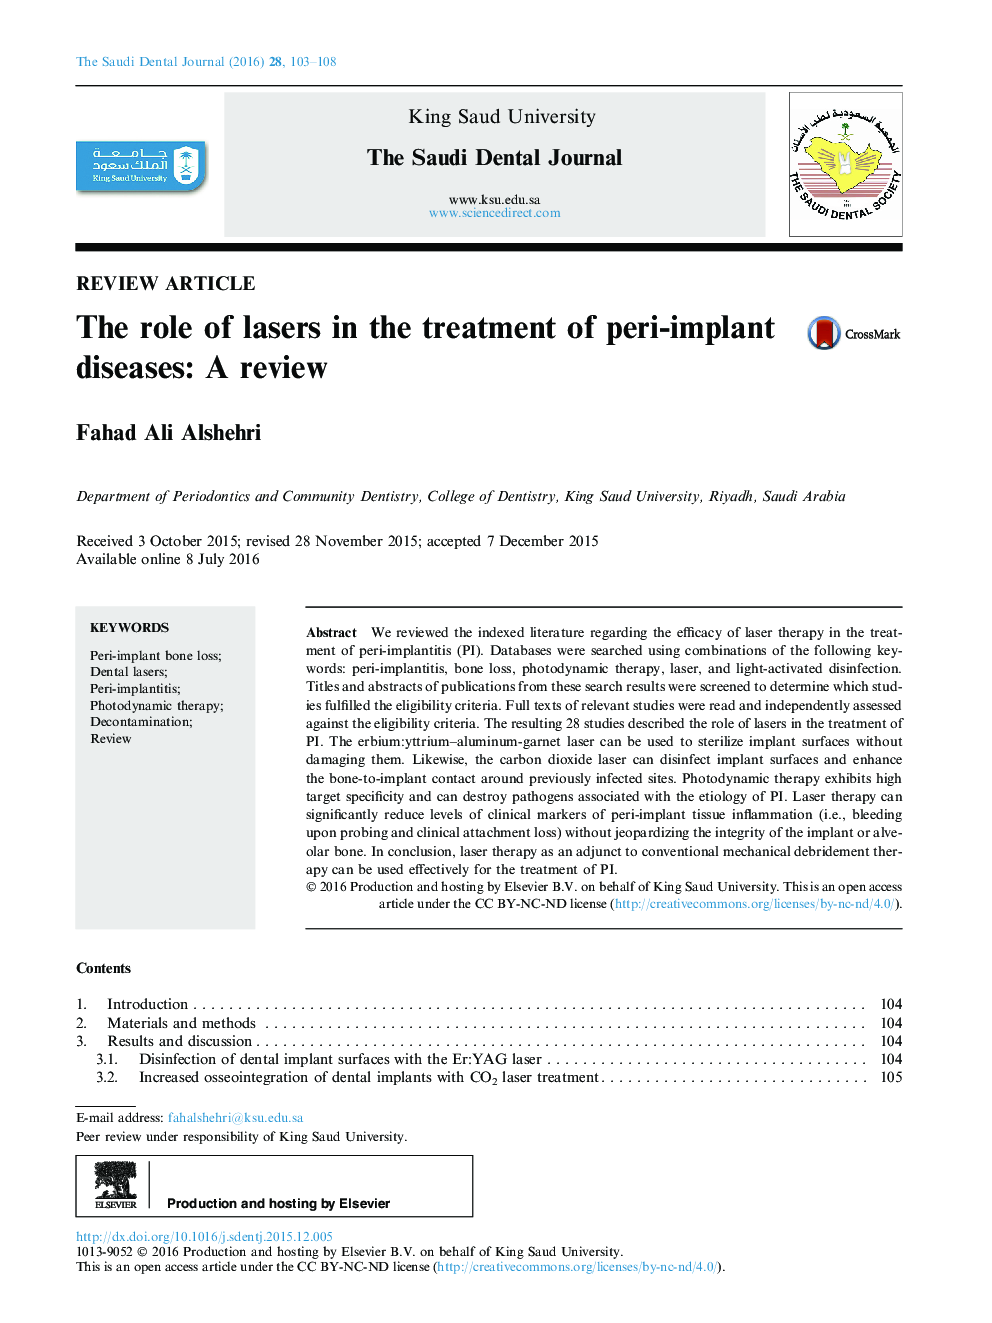 The role of lasers in the treatment of peri-implant diseases: A review 